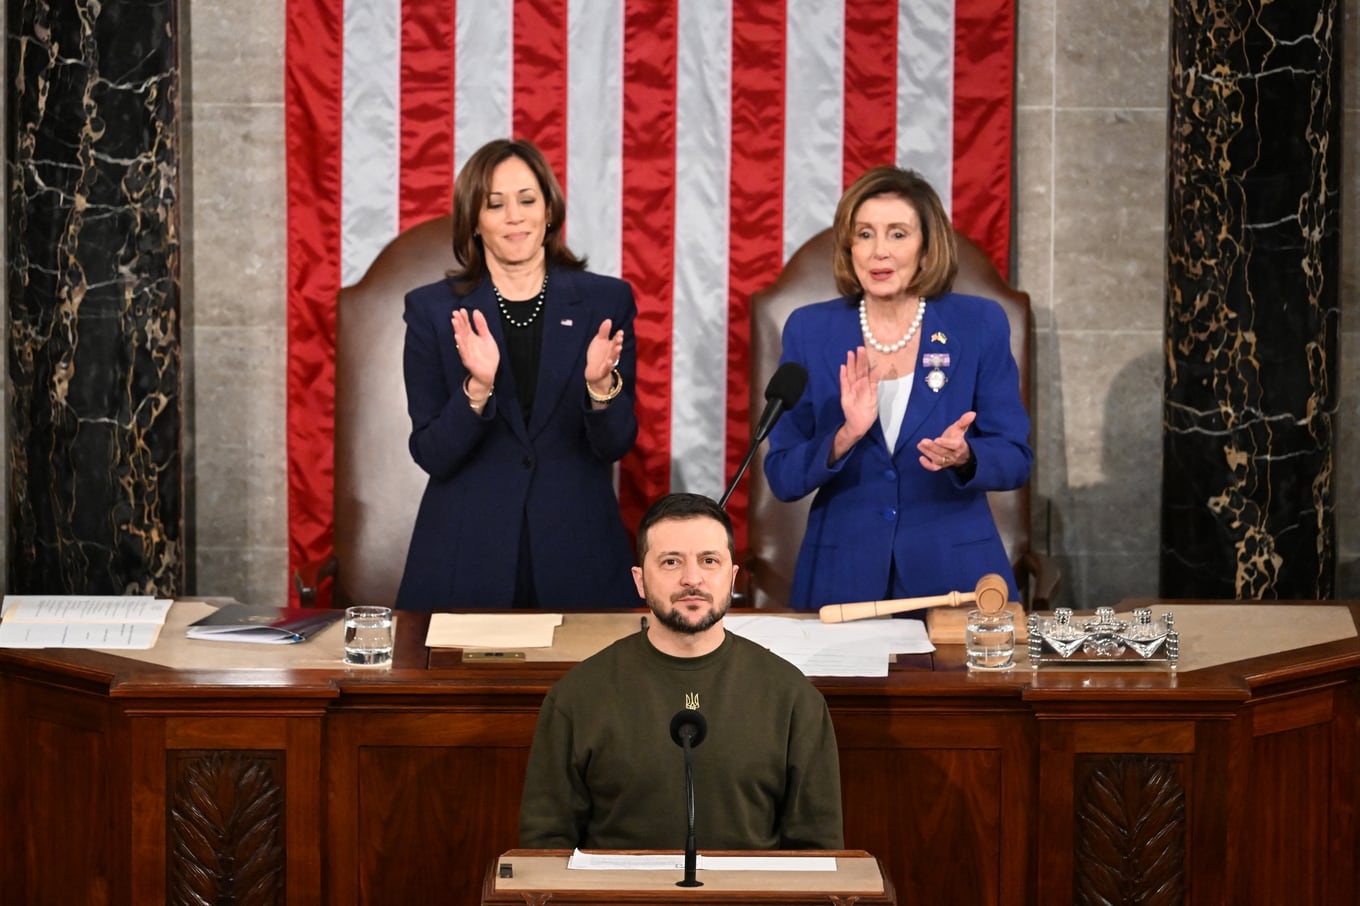 (FILES) In this file photo taken on December 22, 2022 Ukraine's President Volodymyr Zelensky addresses the US Congress as US Vice President Kamala Harris (L) and US House Speaker Nancy Pelosi (D-CA) applaud at the US Capitol in Washington, DC. (Photo by Jim WATSON / AFP)